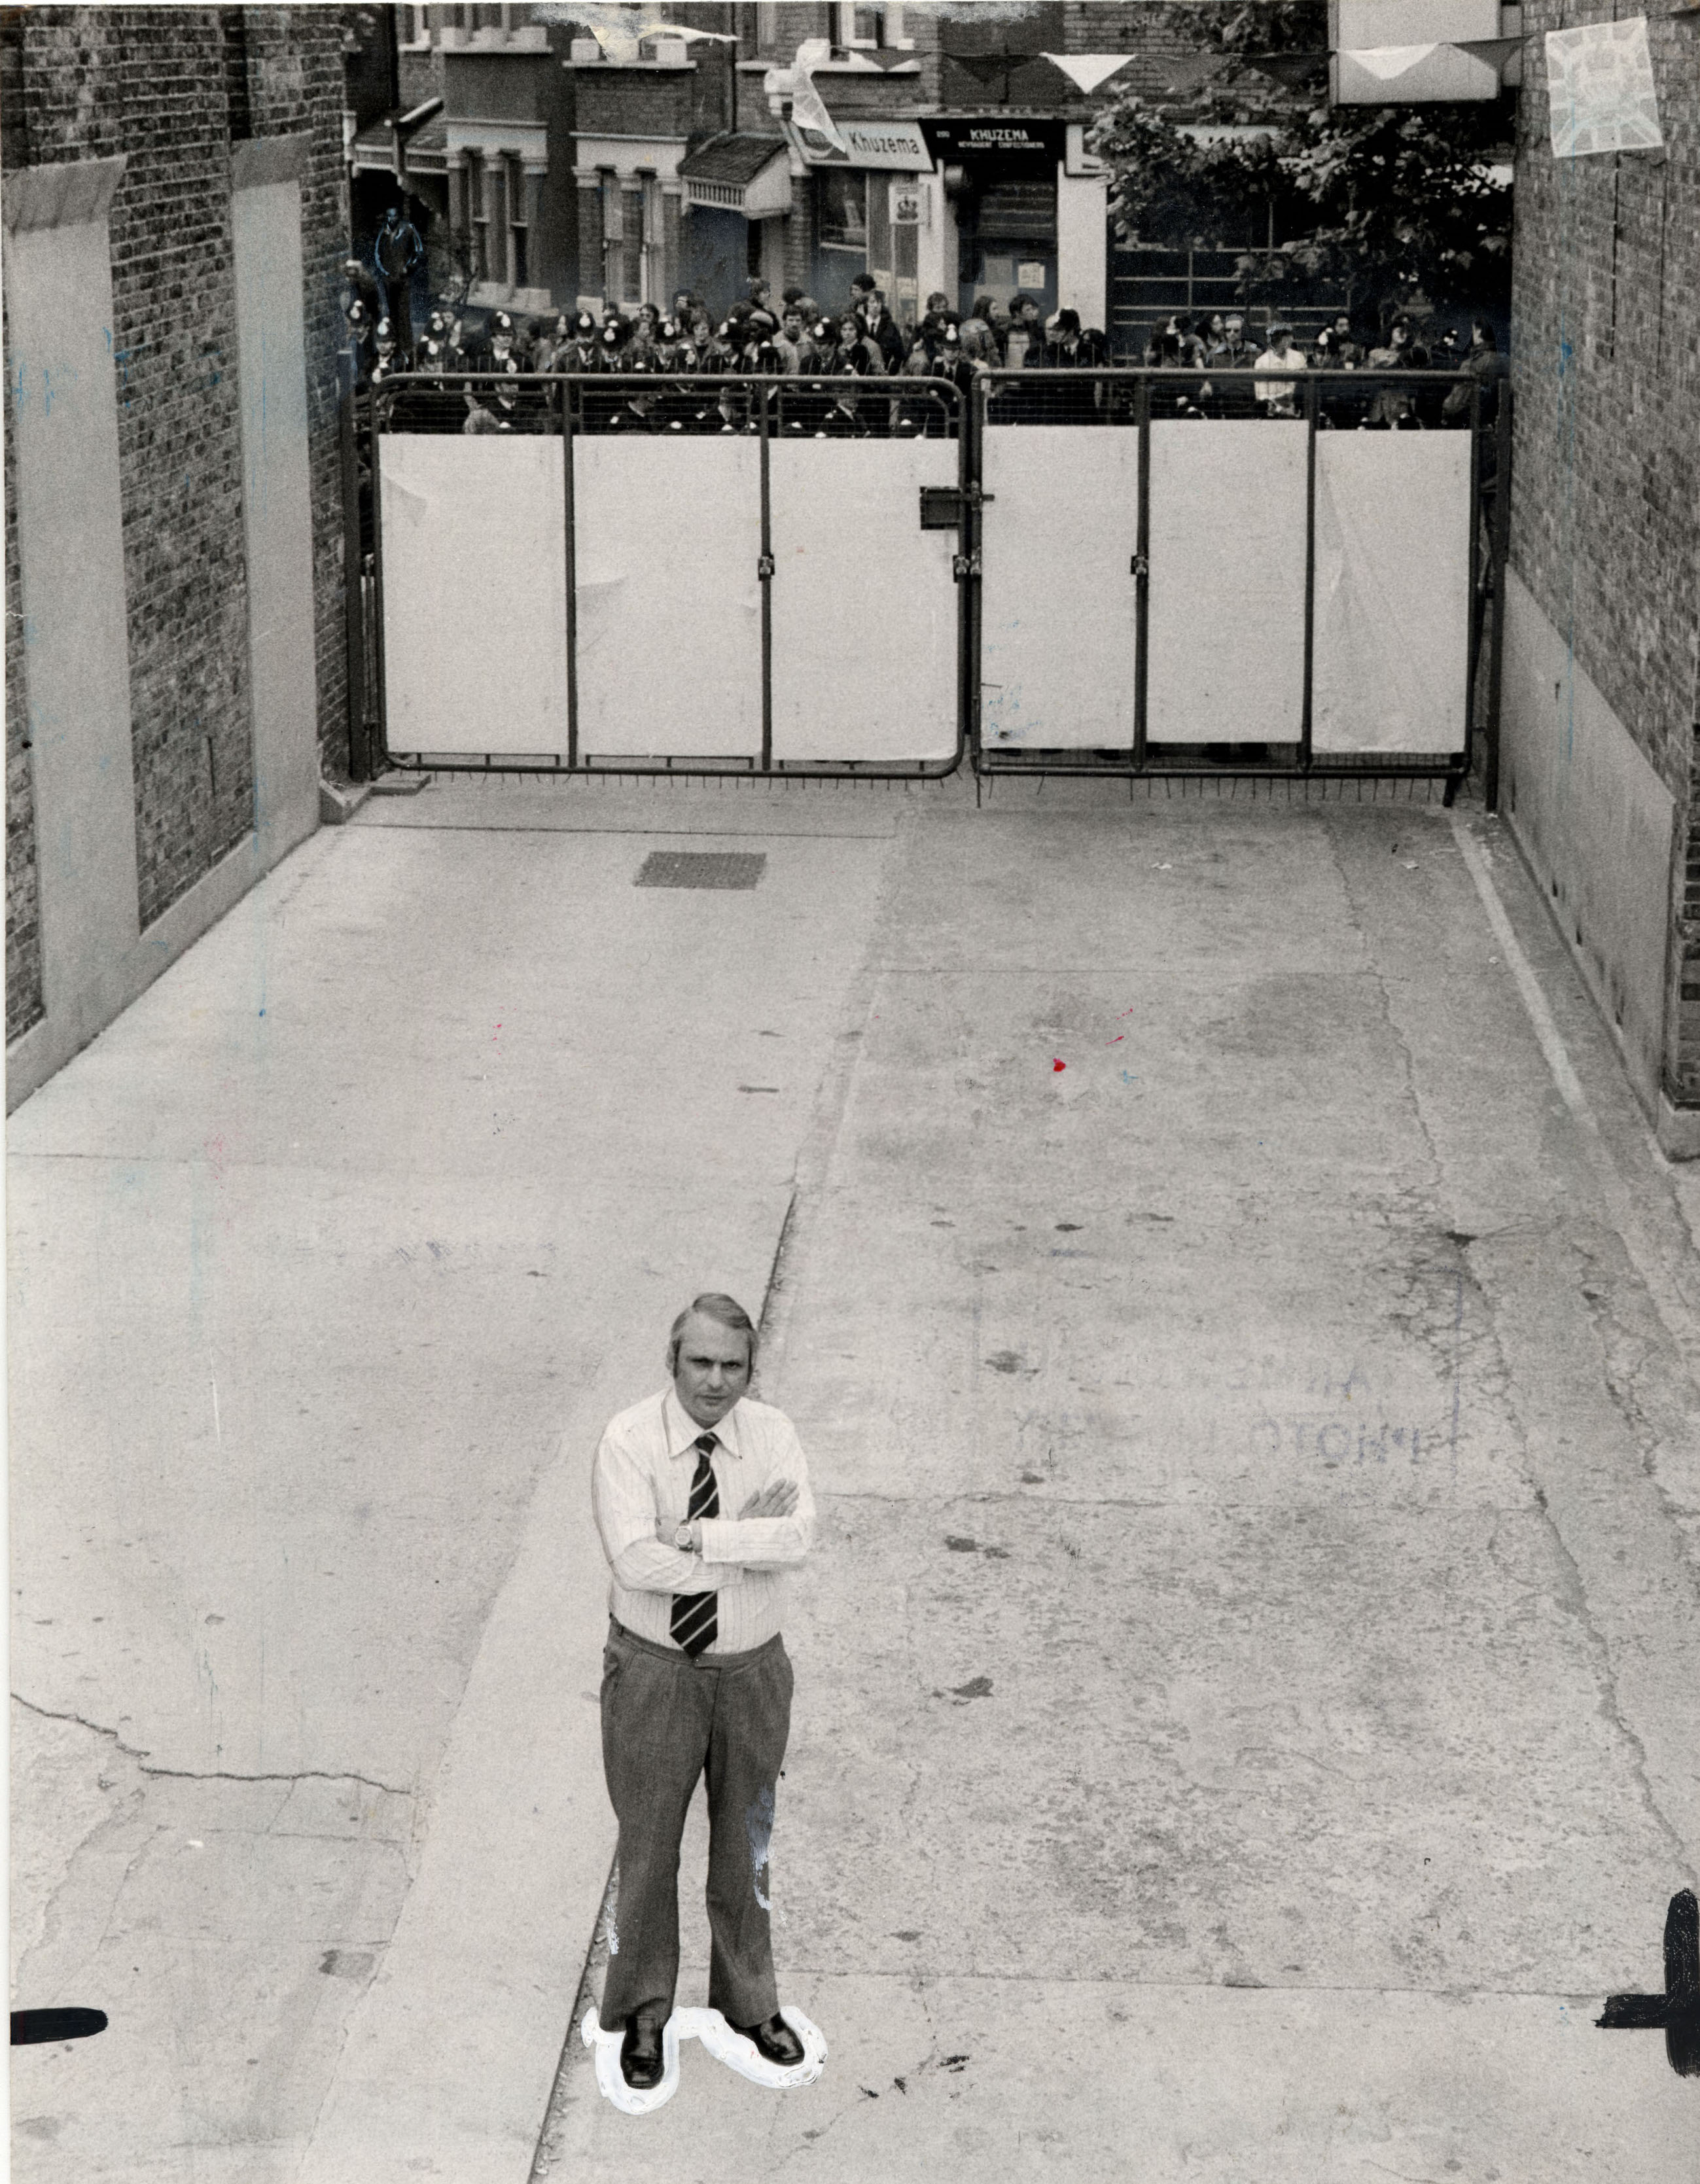 George Ward Grunwick Film Processing Plant Manager Who Has To Play Hide And Seek With The Chanting Pickets To Enter And Leave His Office In An Old Victorian House Next To His Main Works At Chapter Road Willesden.